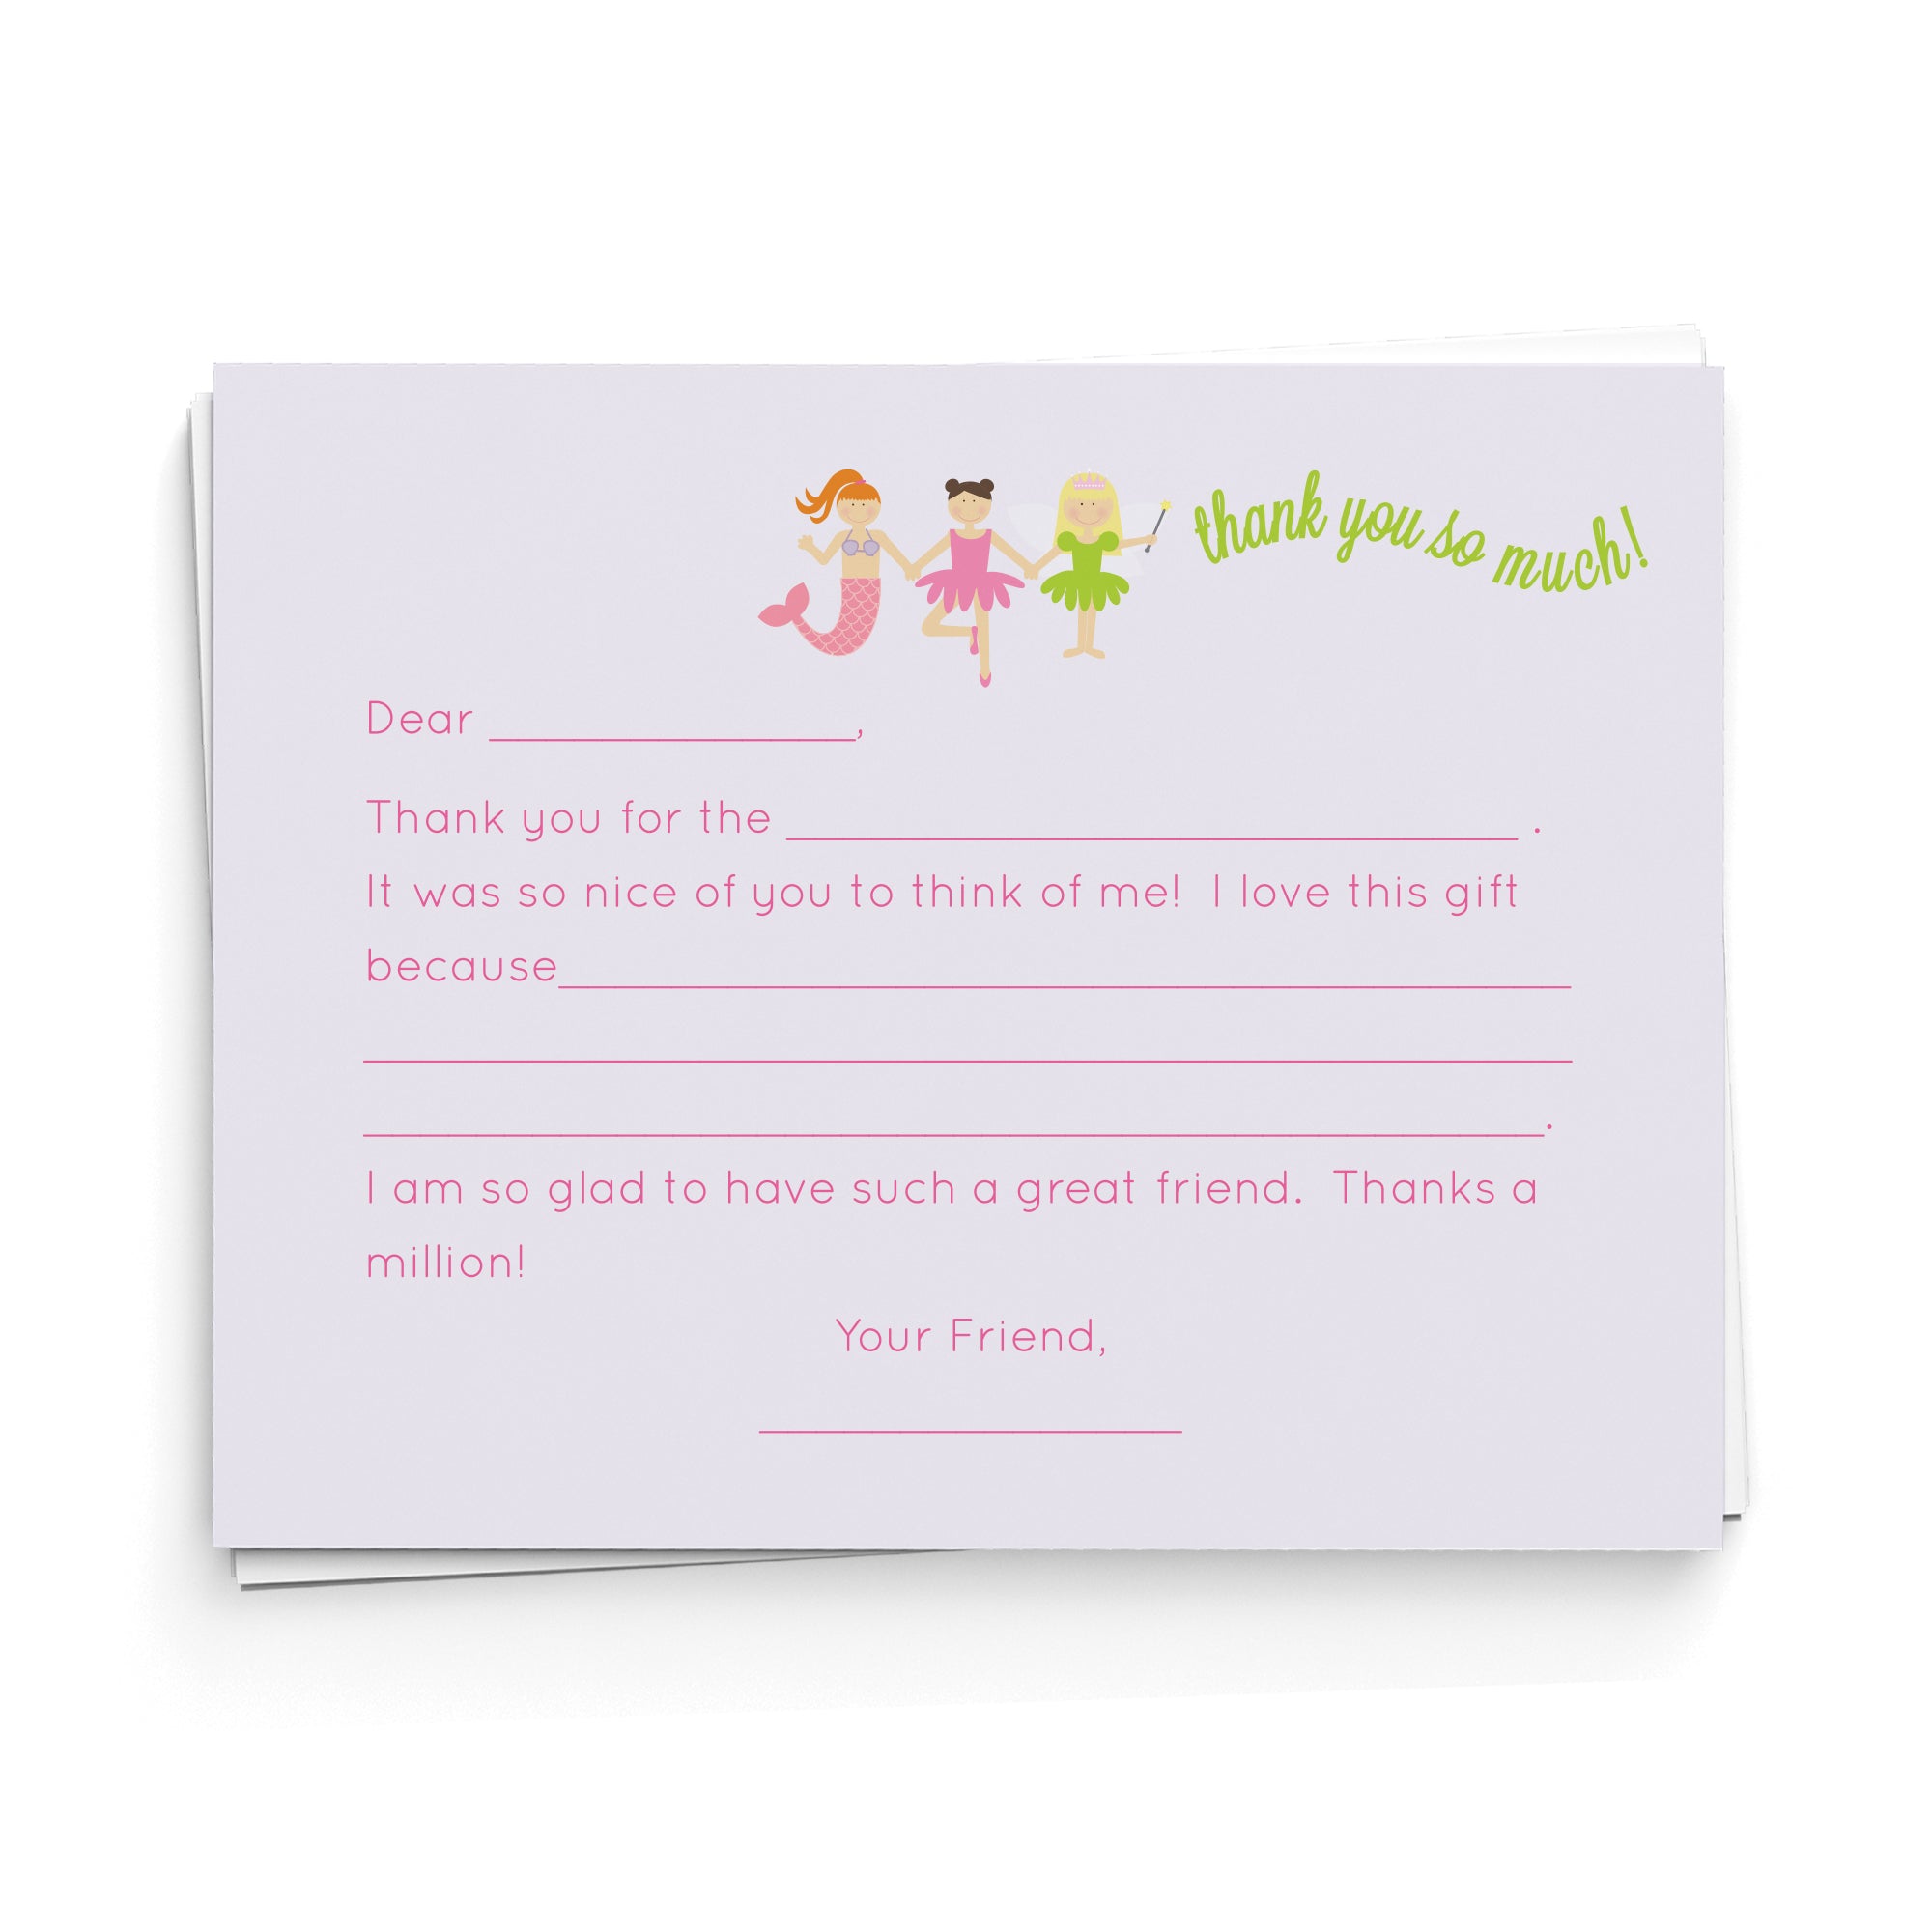 Princess Lineup Fill-in-the-Blank Thank You Cards